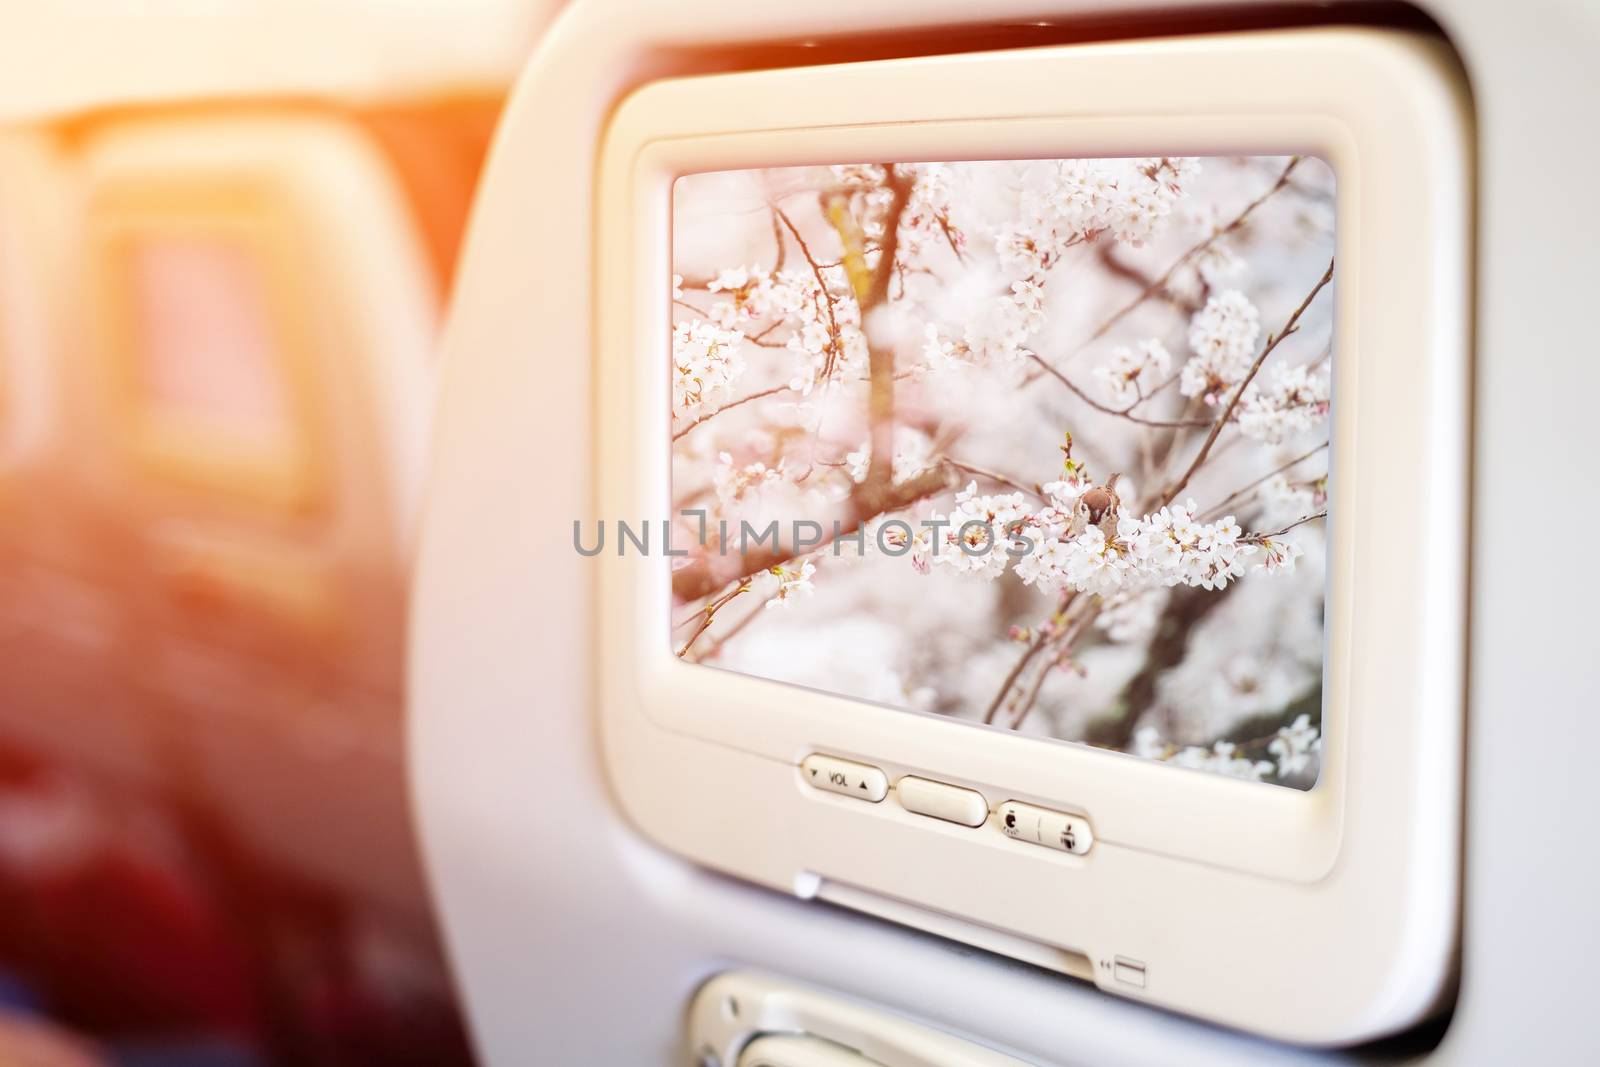 Aircraft monitor in front of passenger seat showing Little bird  by Surasak